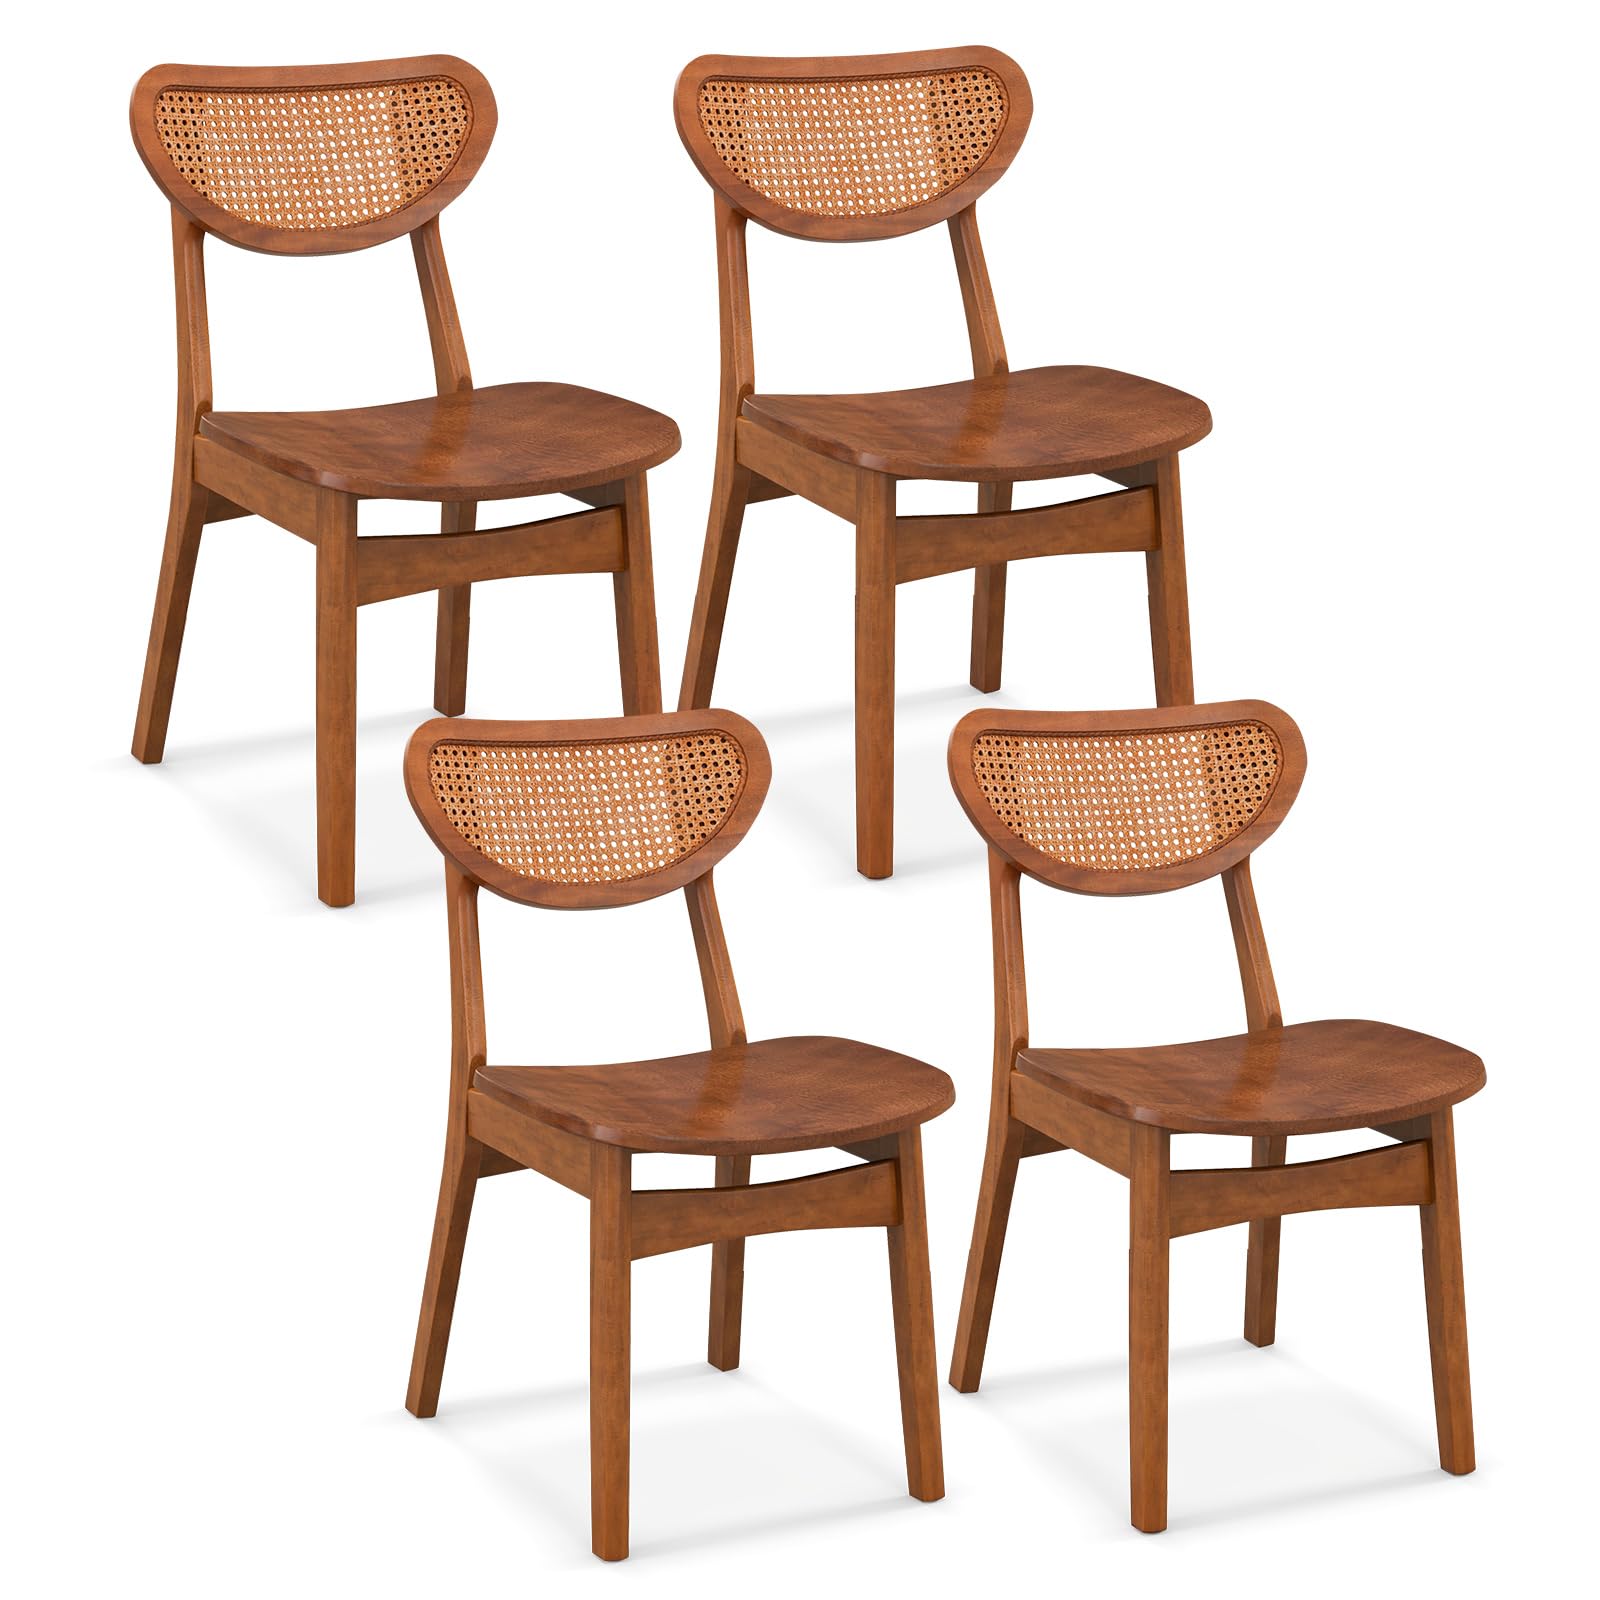 Giantex Wooden Dining Chair, Rattan Accent Chairs for Restaurant